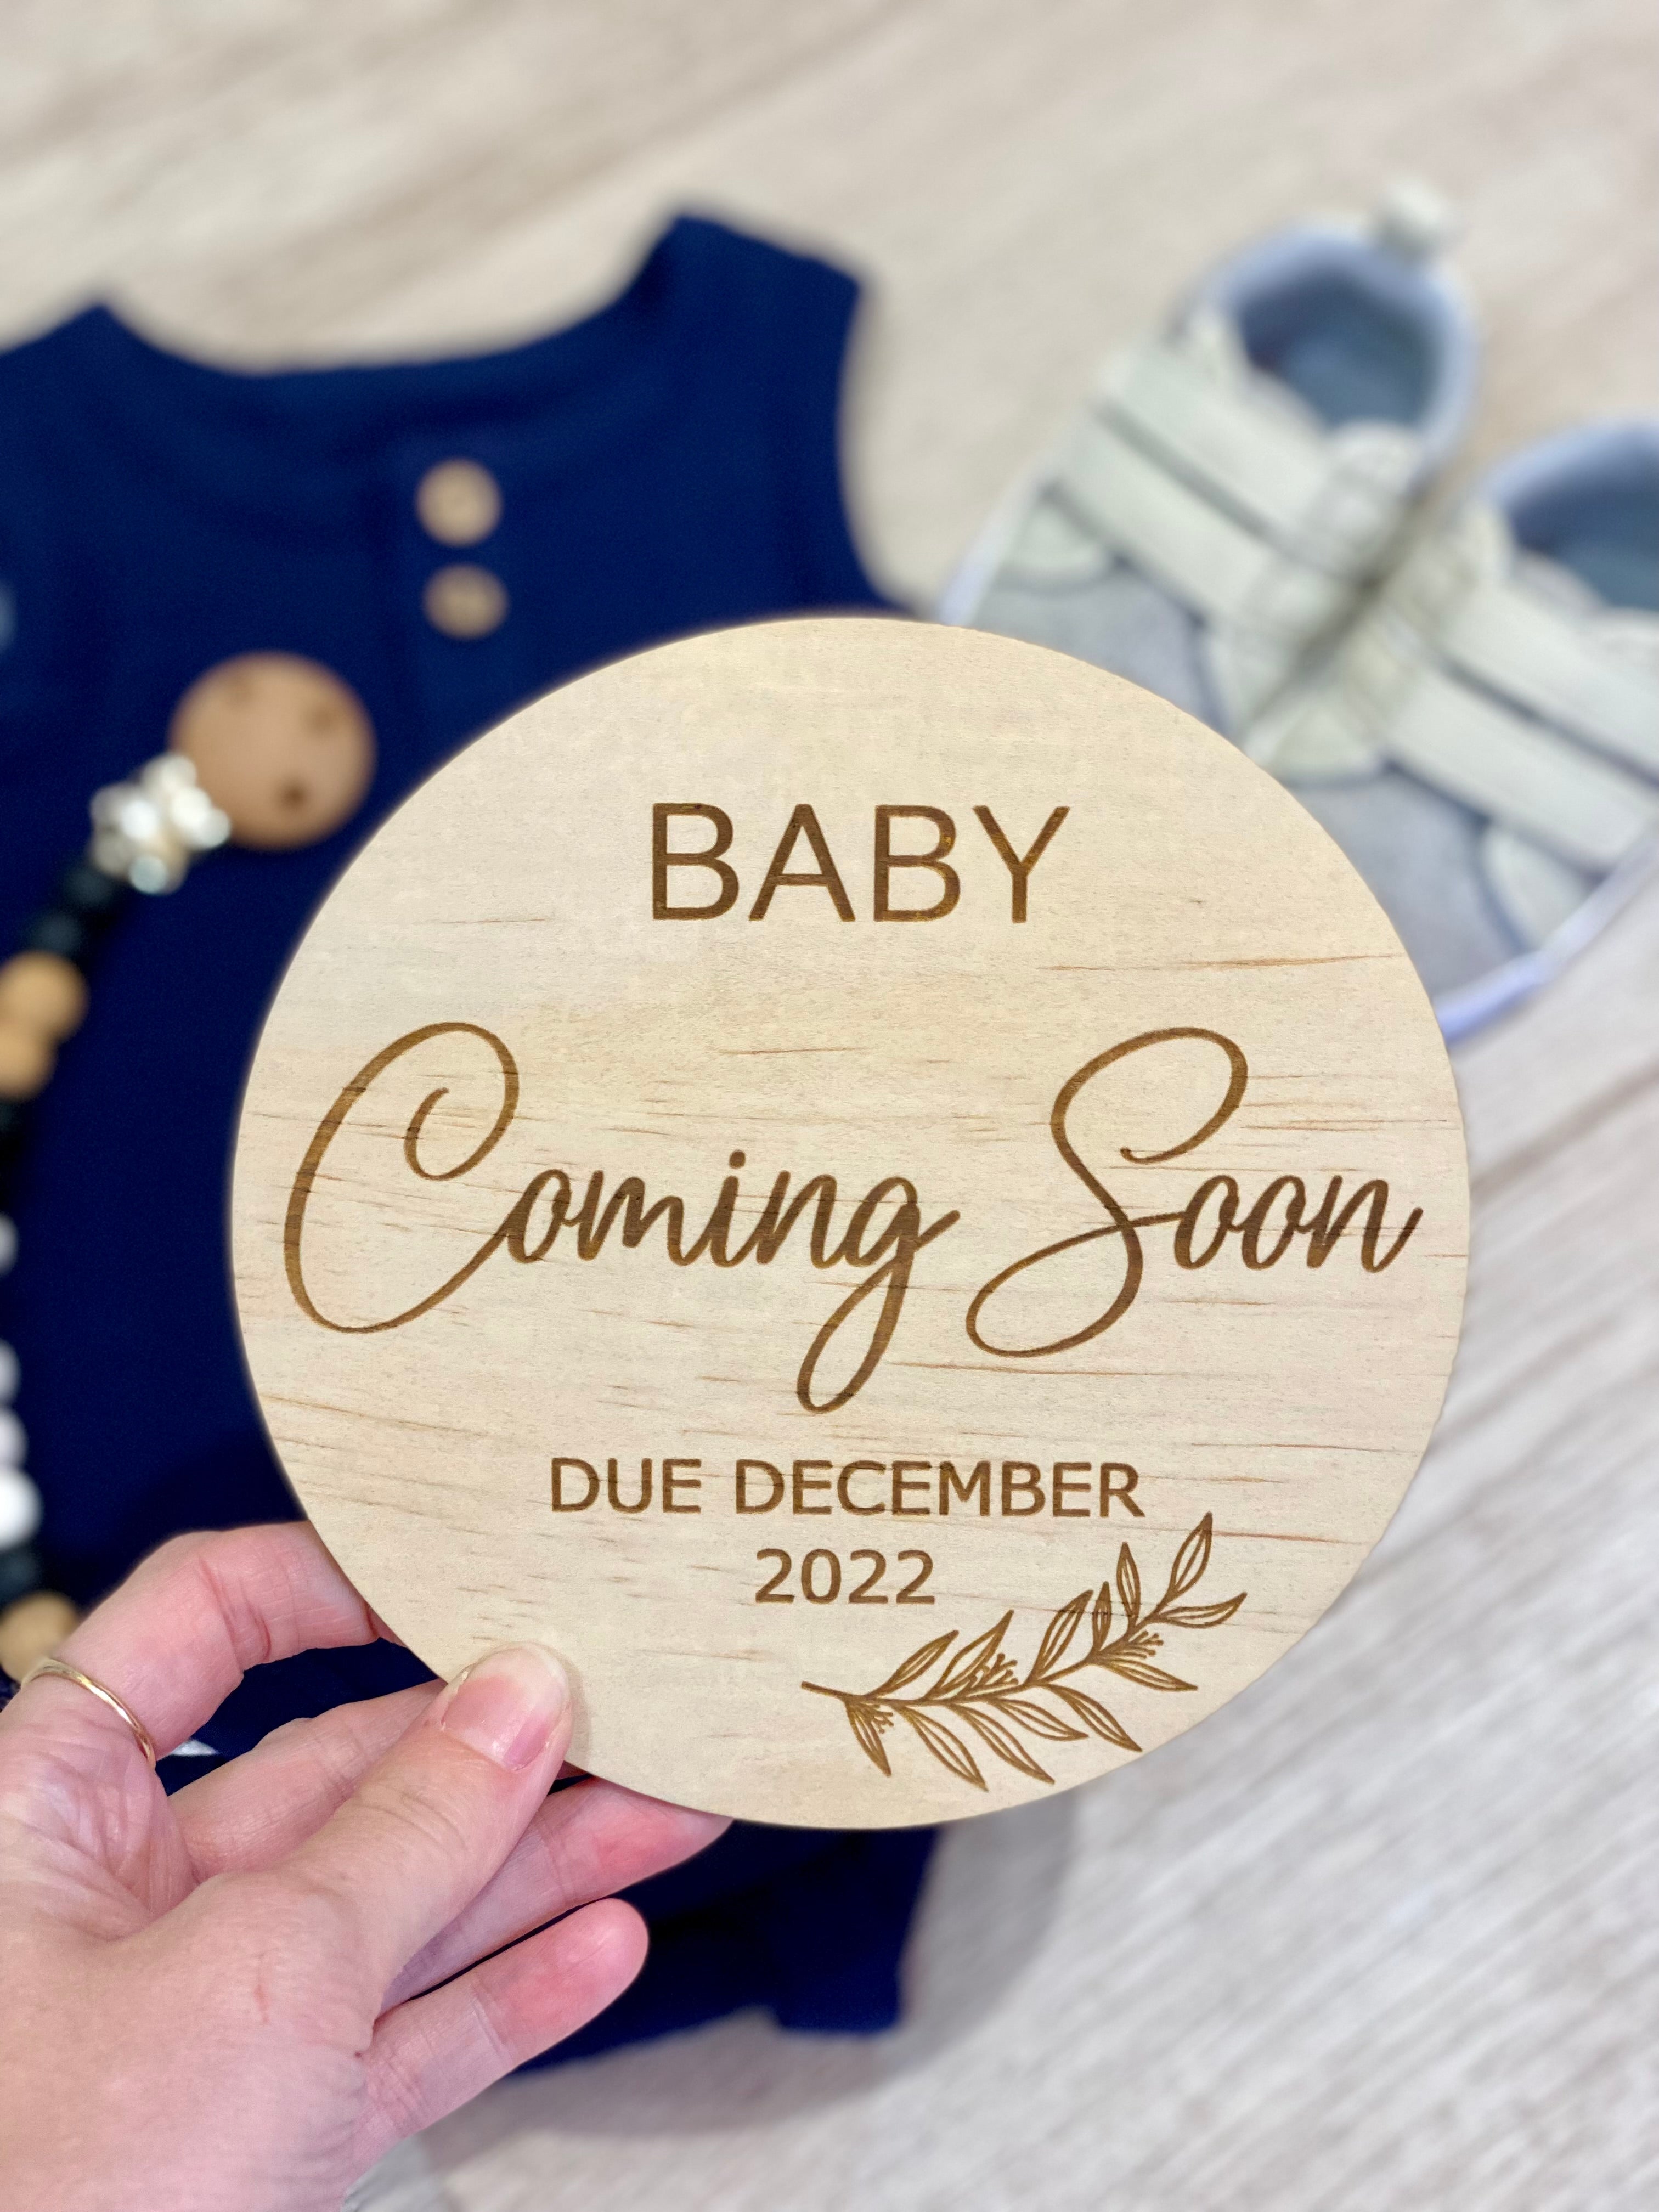 Oh Baby! Coming soon!' Pregnancy Announcement Disc – TinyTimberandCo